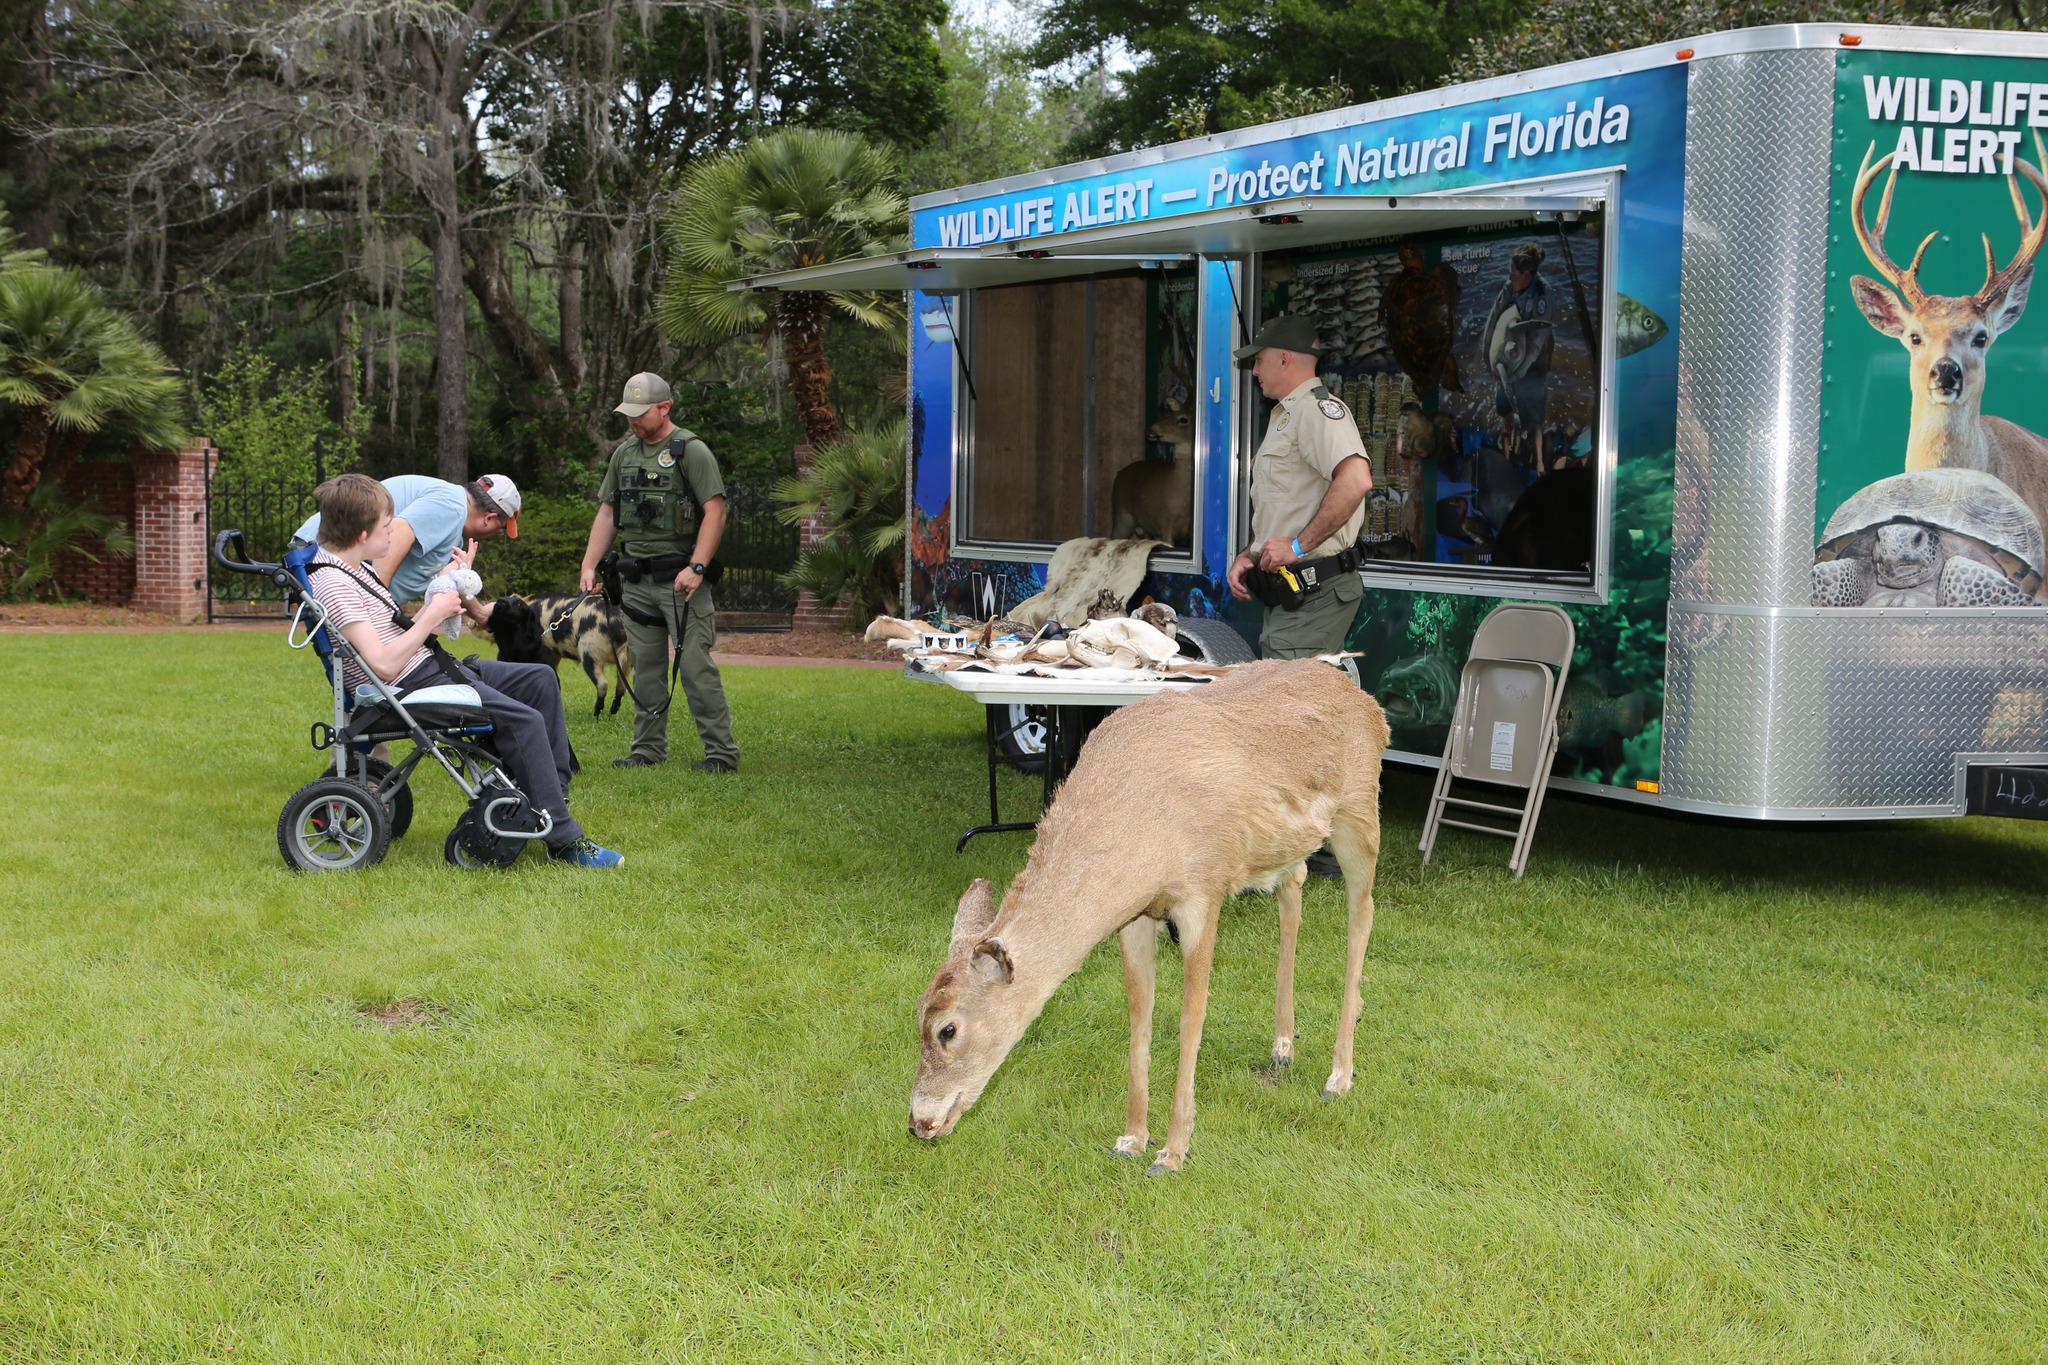 fwc display with taxidermy deer and pig